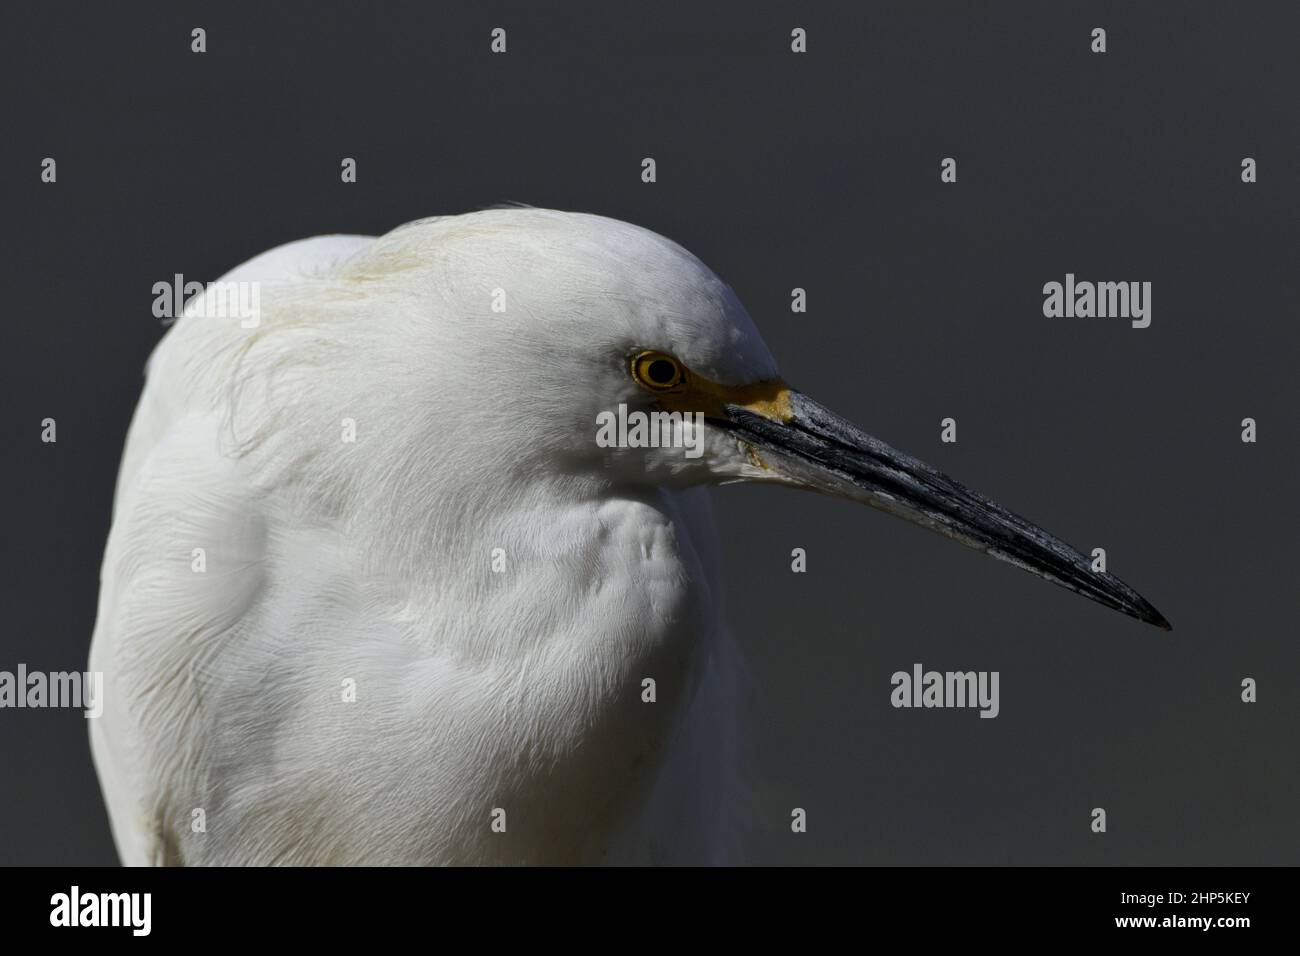 Natural tranquility in close up Snowy Egret portrait against charcoal gray background with subtle shadowing Stock Photo